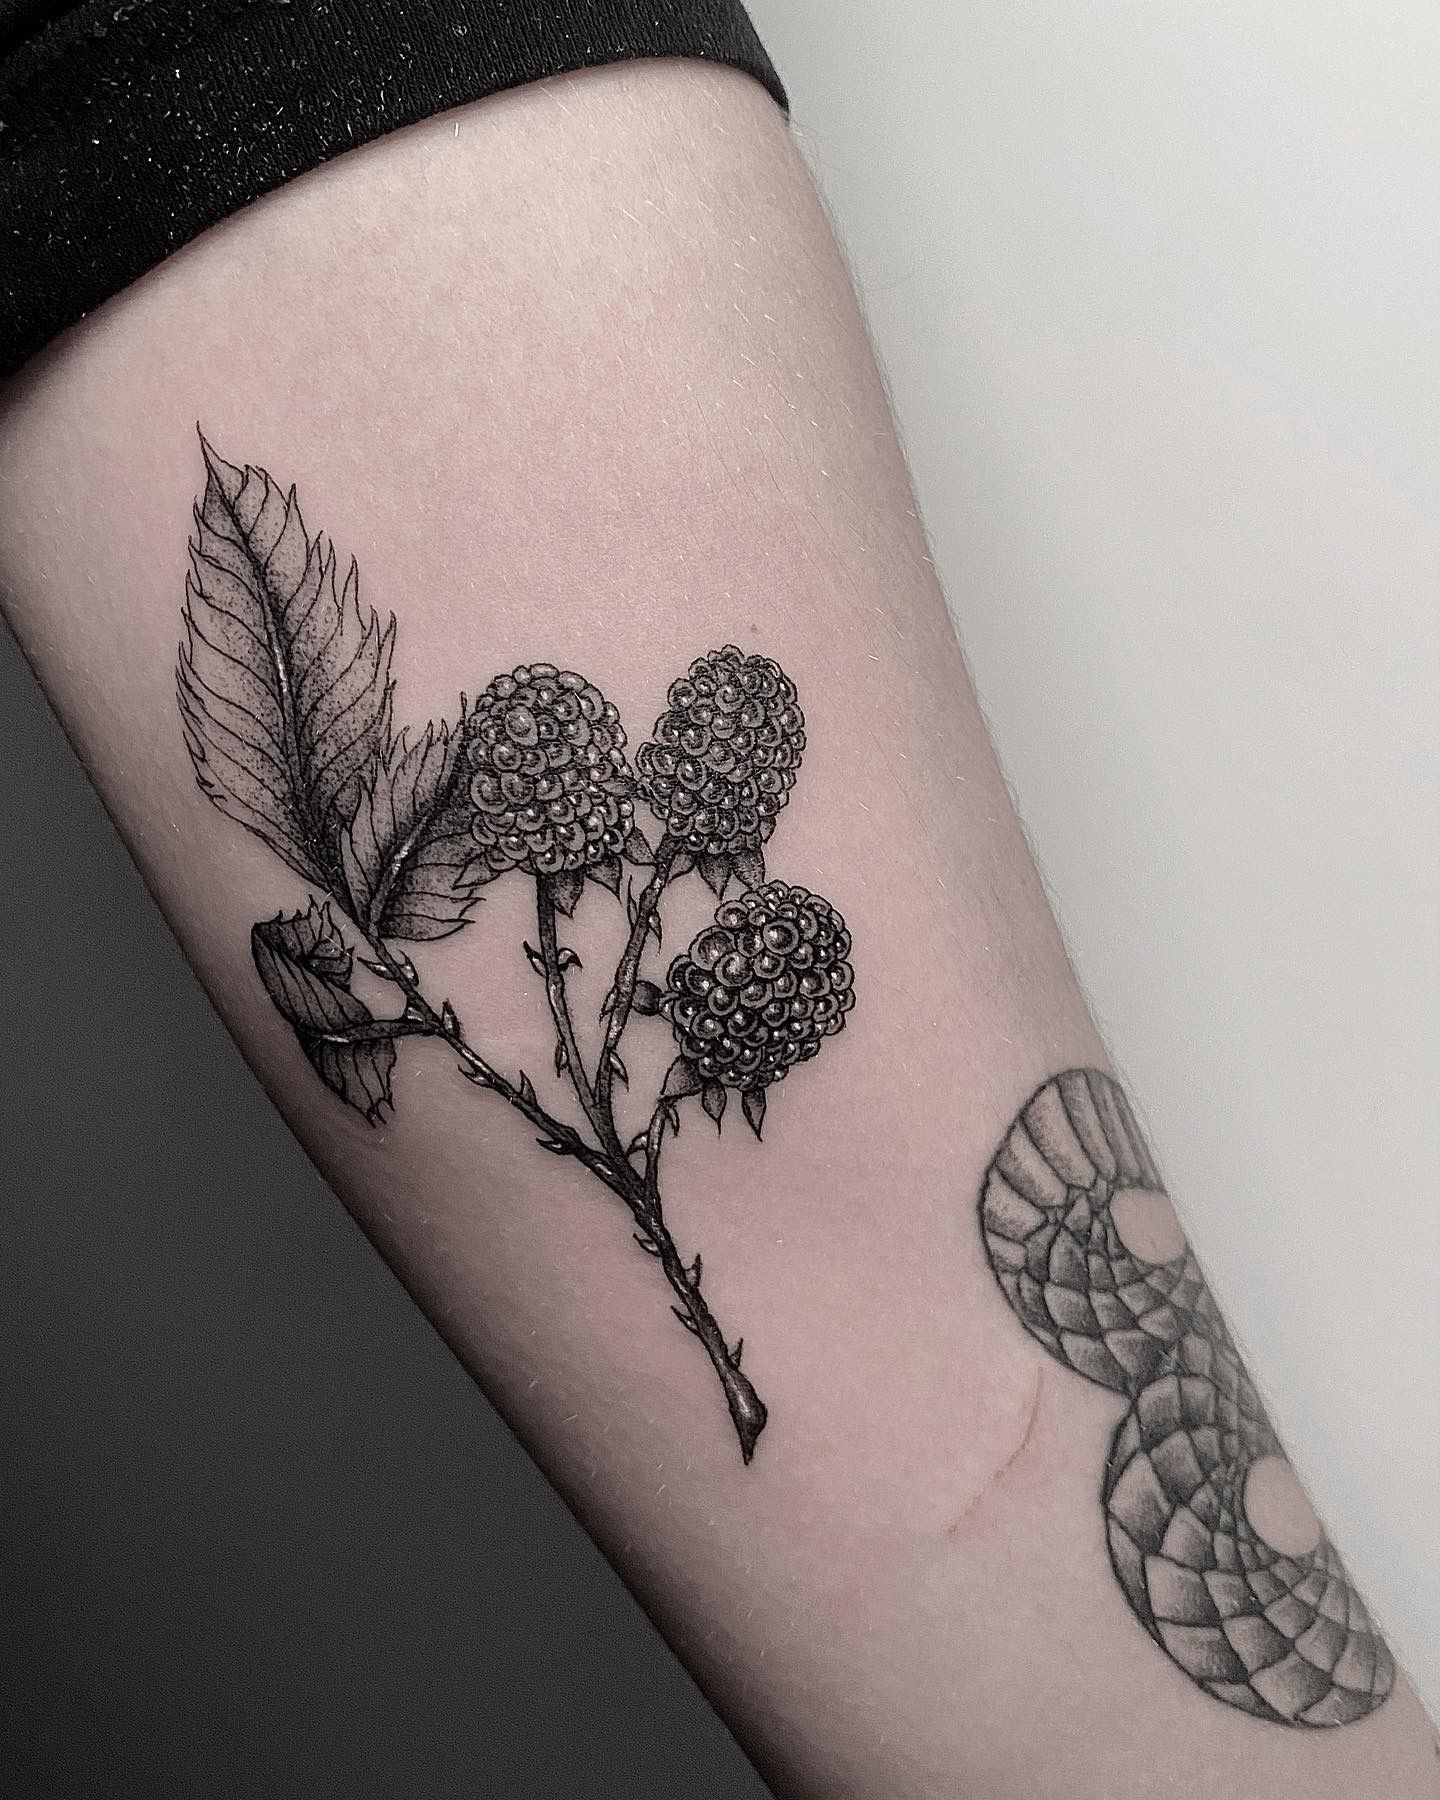 Tattoo uploaded by Stacie Mayer • Traditional style blackberry tattoo by  Tan Van Den Broek. #fruit #blackberry #berry #traditional #TanVanDenBroek •  Tattoodo